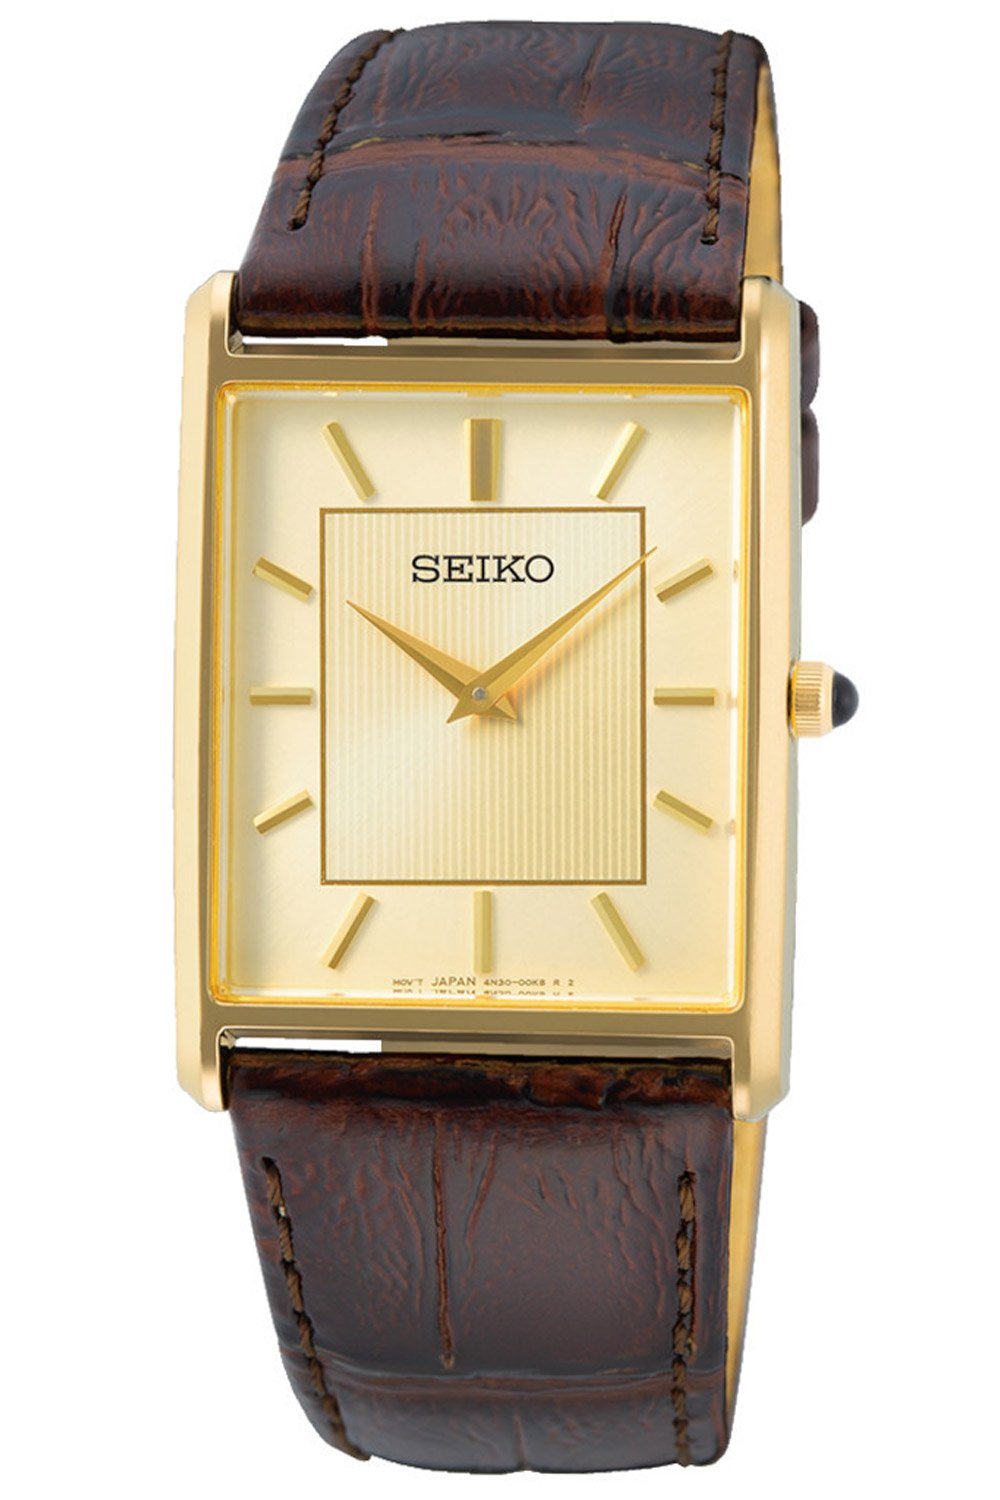 Seiko SWR064P1 Men's Watch with Leather Strap Brown/Gold Tone